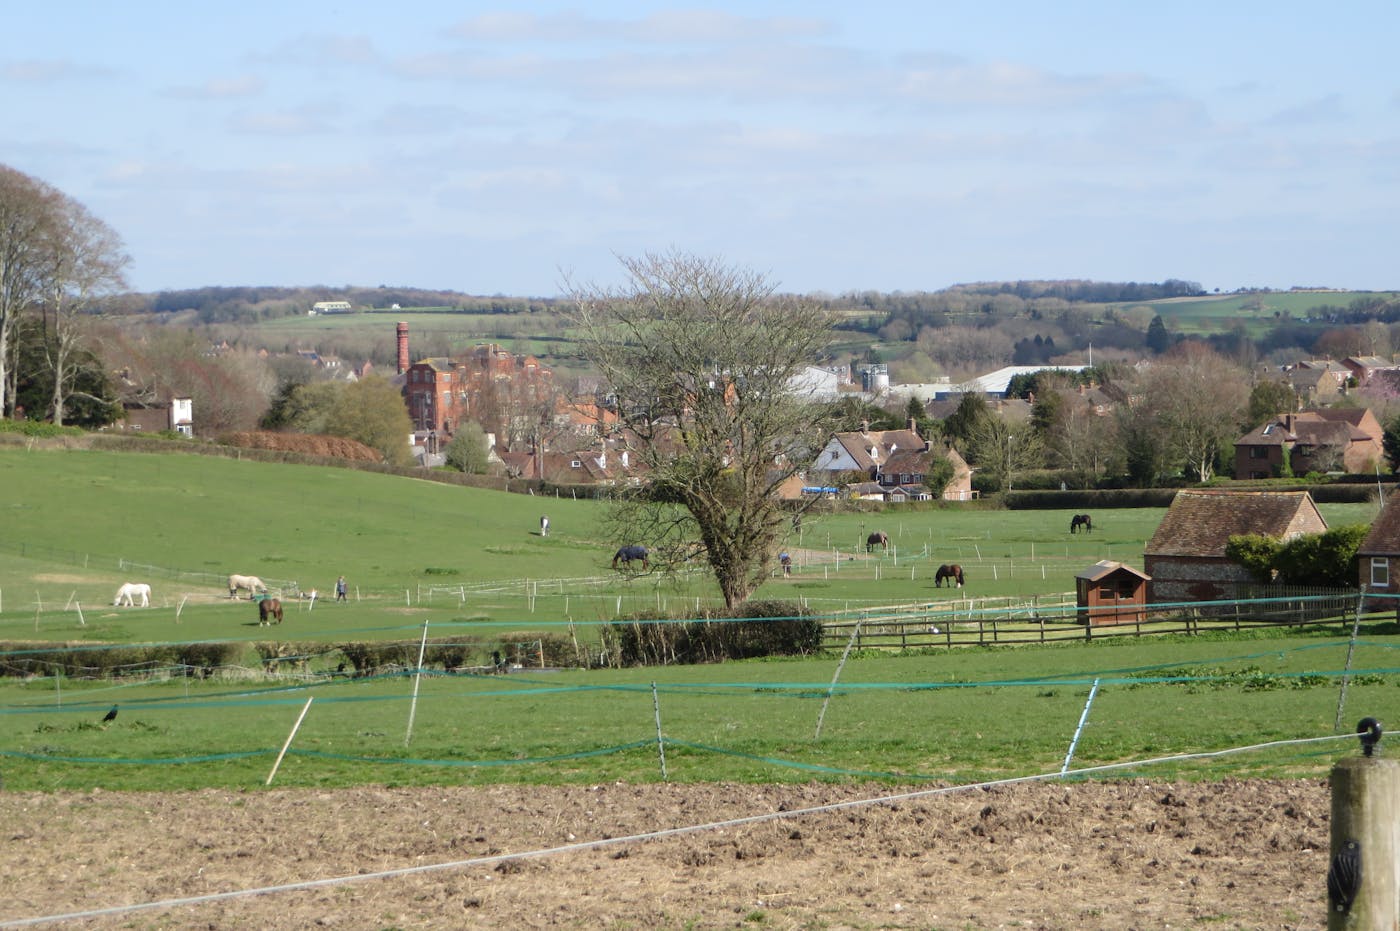 Horses on agricultural land, with village behind